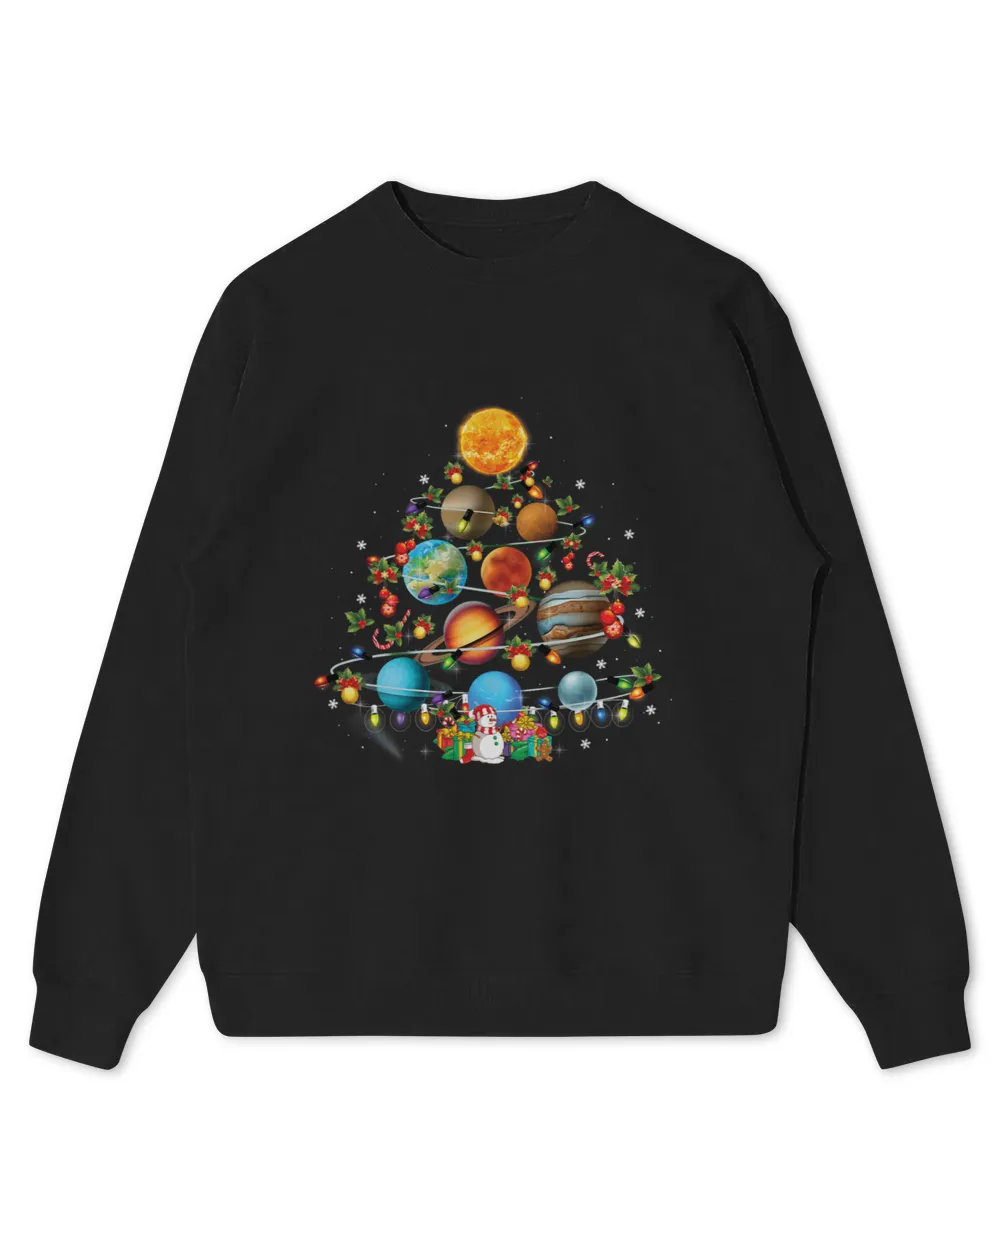 Solar System Planets Christmas Ornament Space Scientist